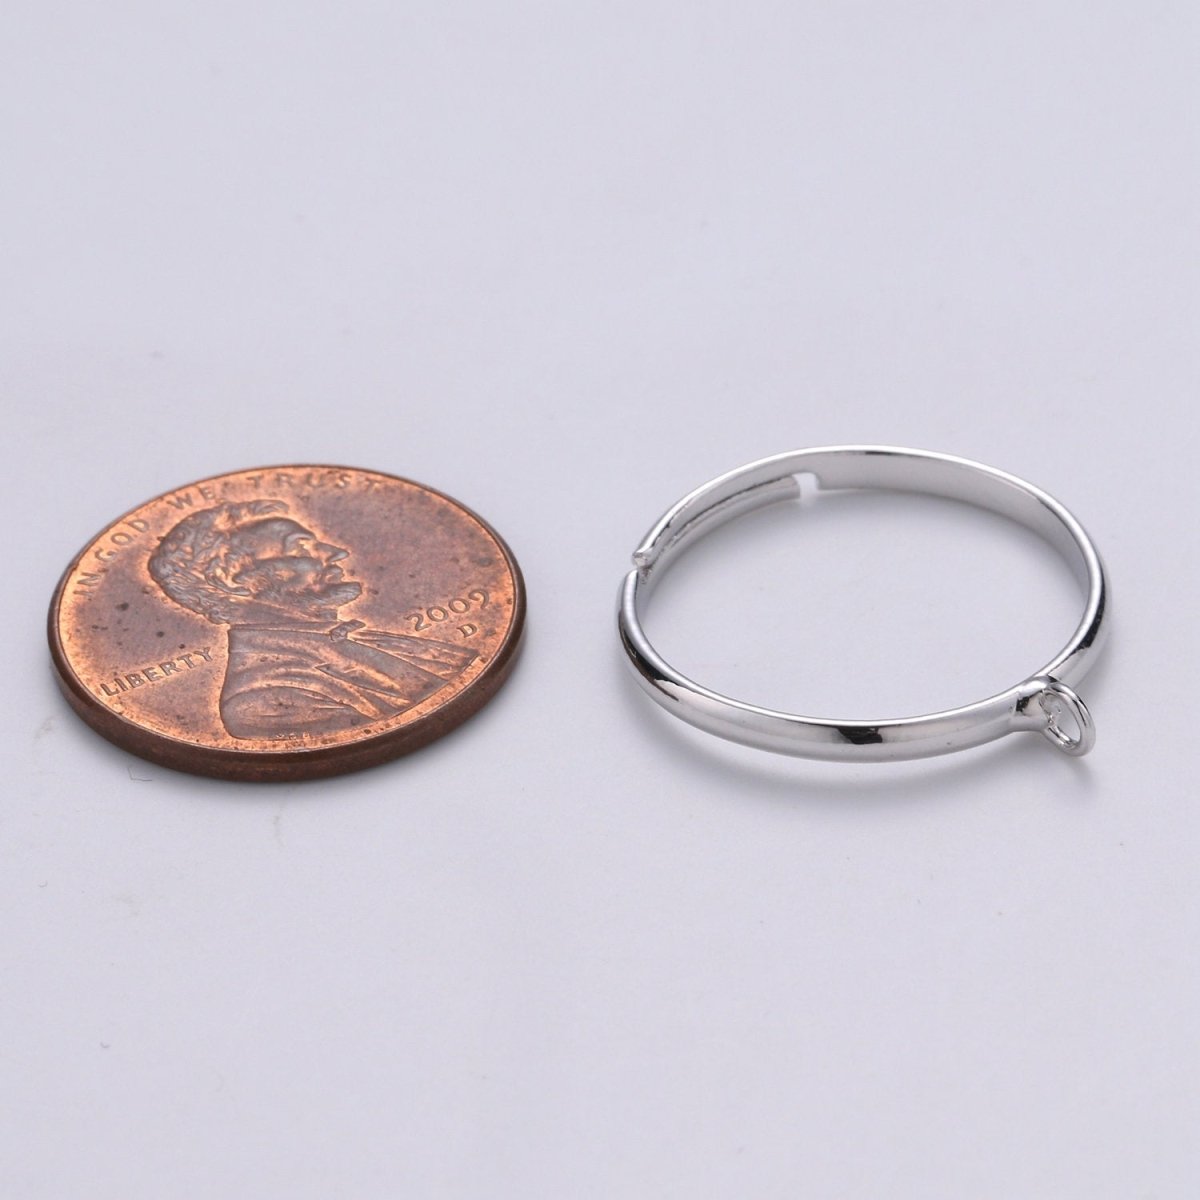 Adjustable Ring with open ring for Charm Gold Finish Rings Silver Ring Wholesale Jewelry Making Affordable Bulk Gold Plated Ring Supply K-815 K-816 - DLUXCA